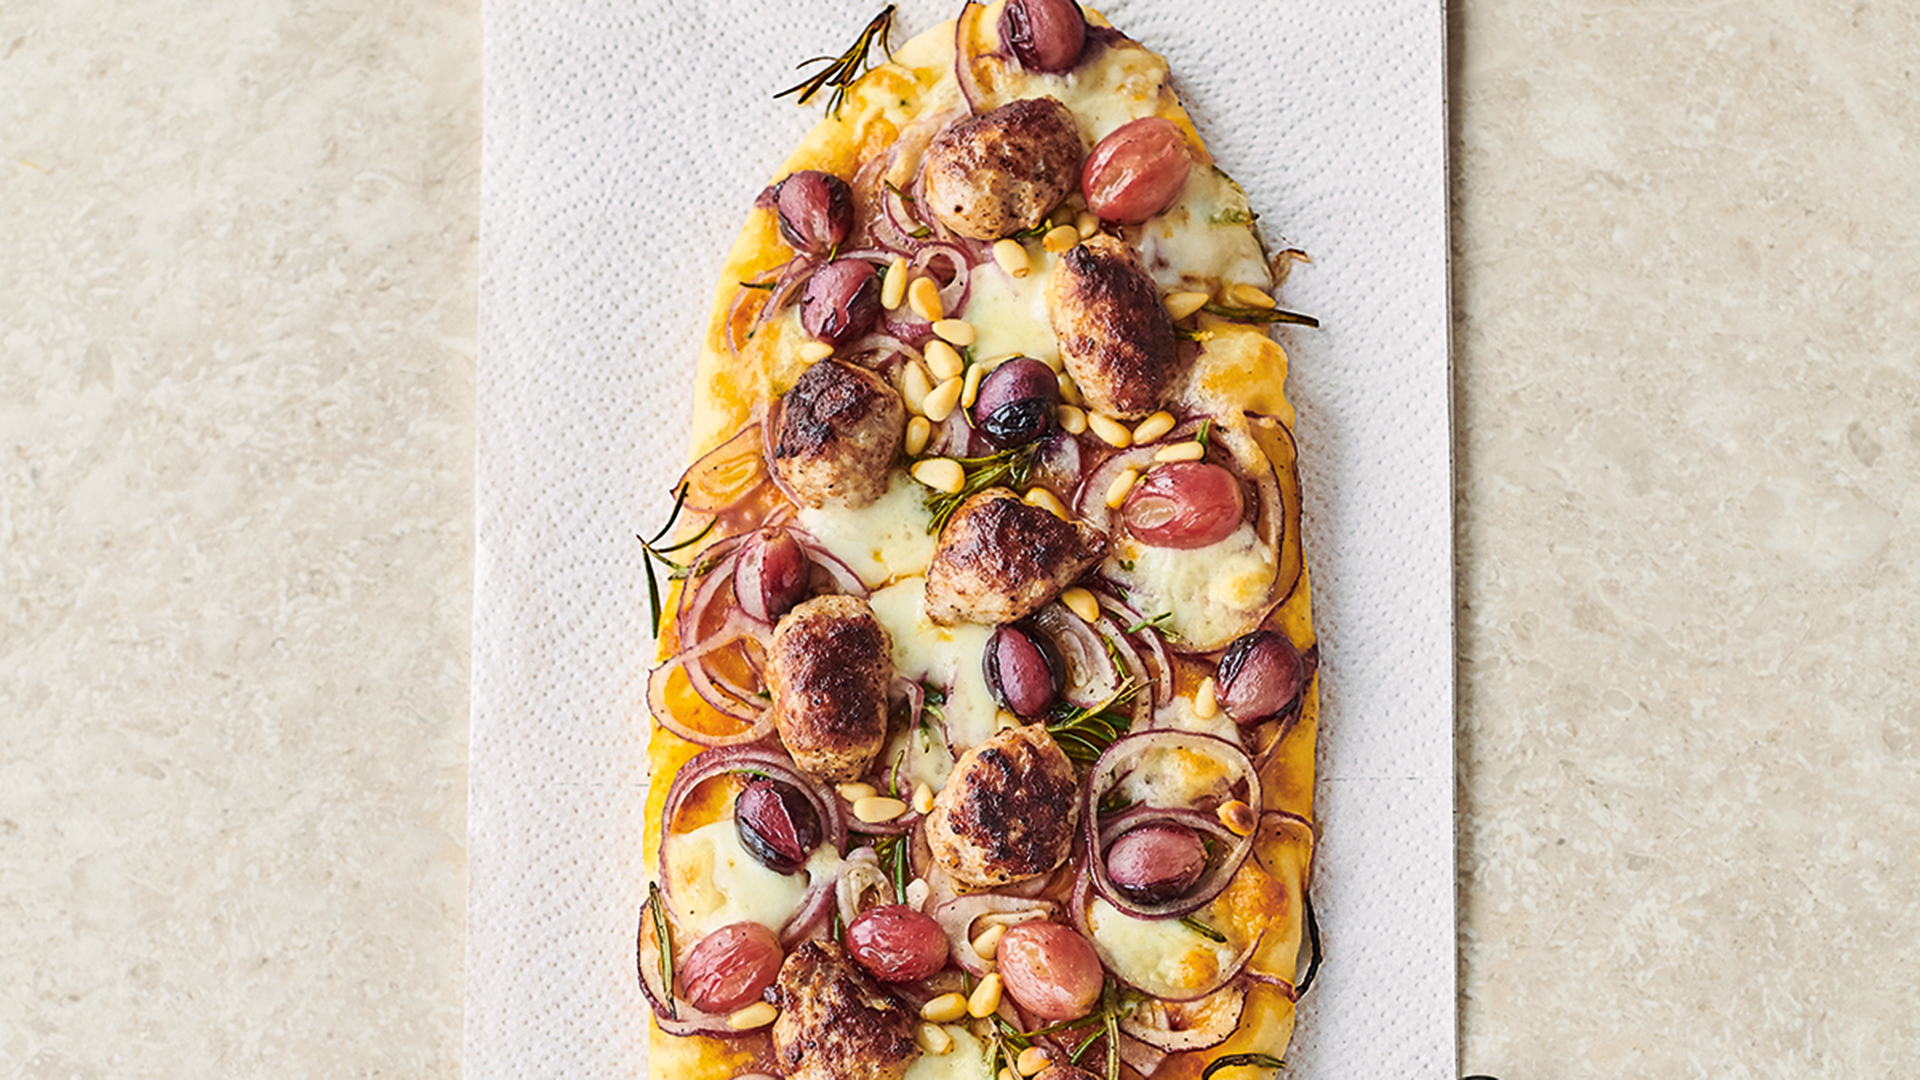 Quick and sausage pizza red onion, rosemary, grapes and pine nuts